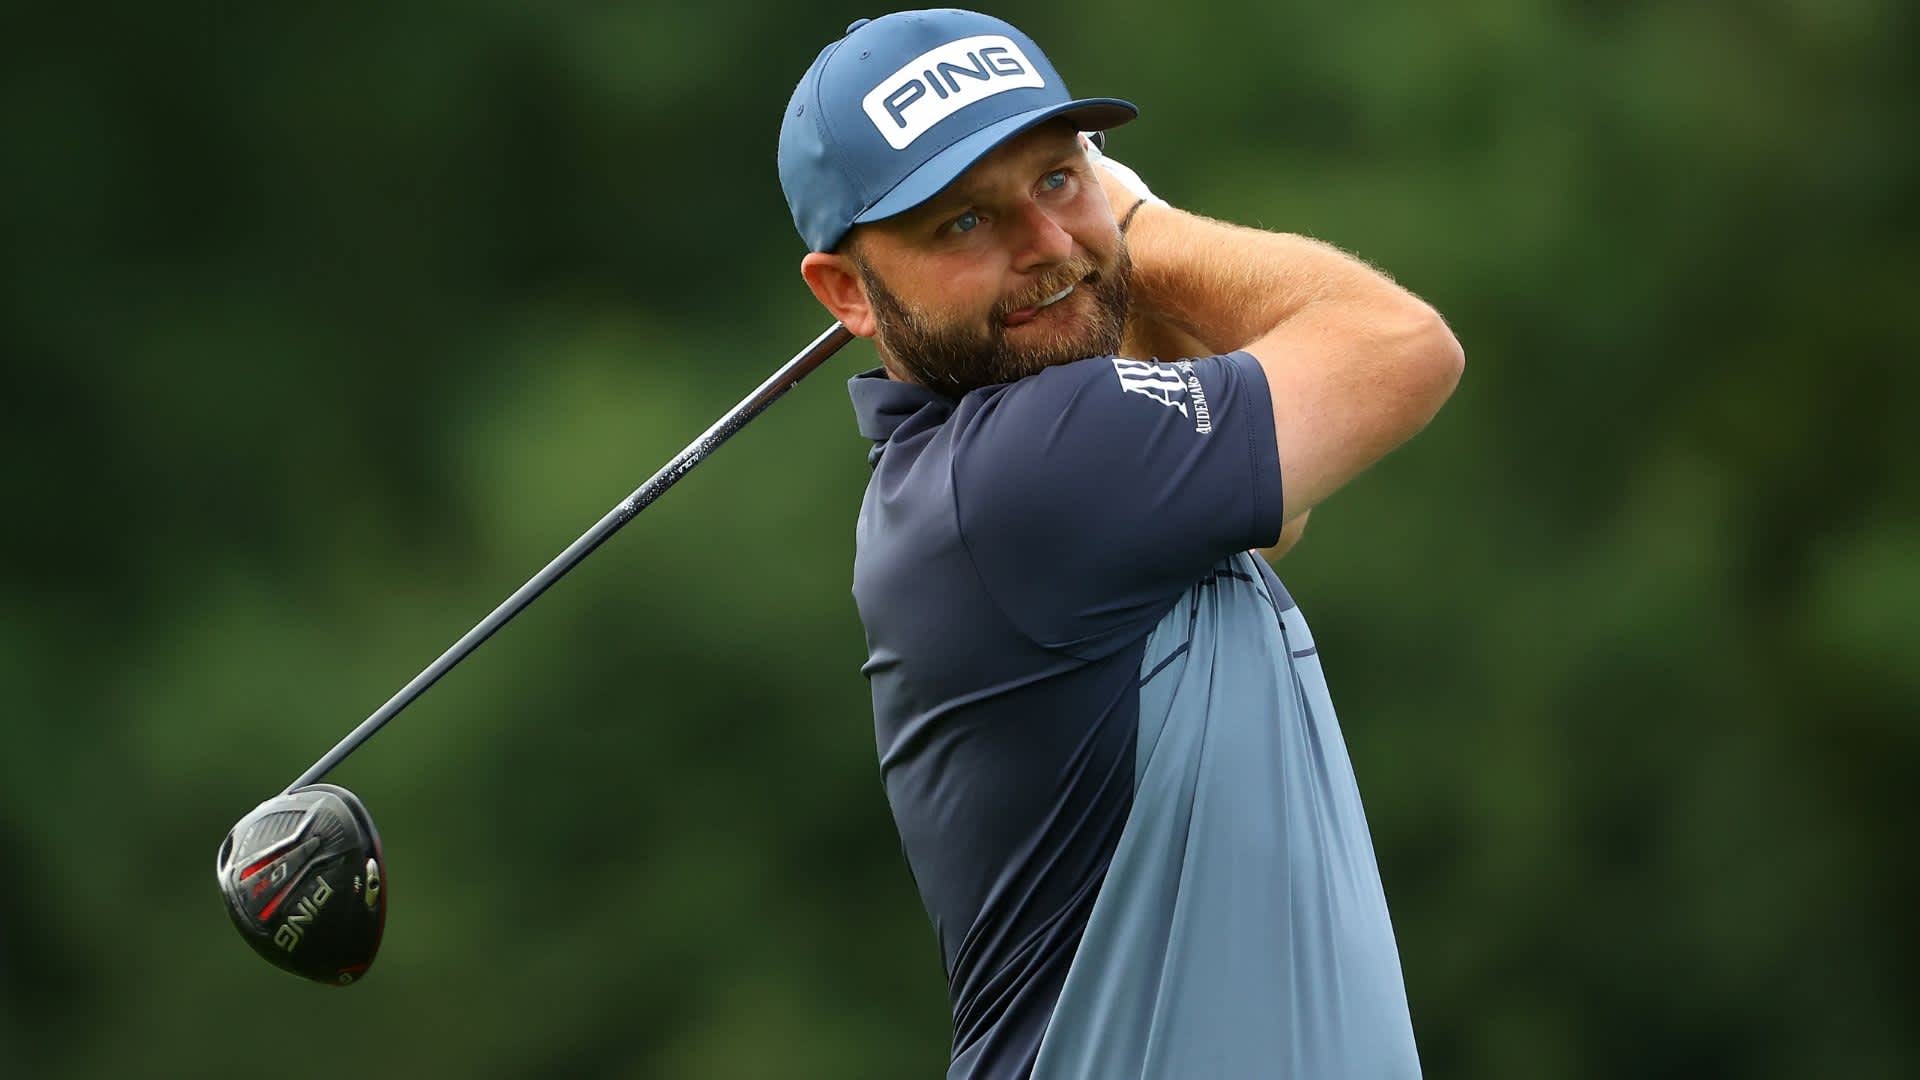 European Tour: Englishman Andy Sullivan posted 69 in second round, sits 4 shots off the lead